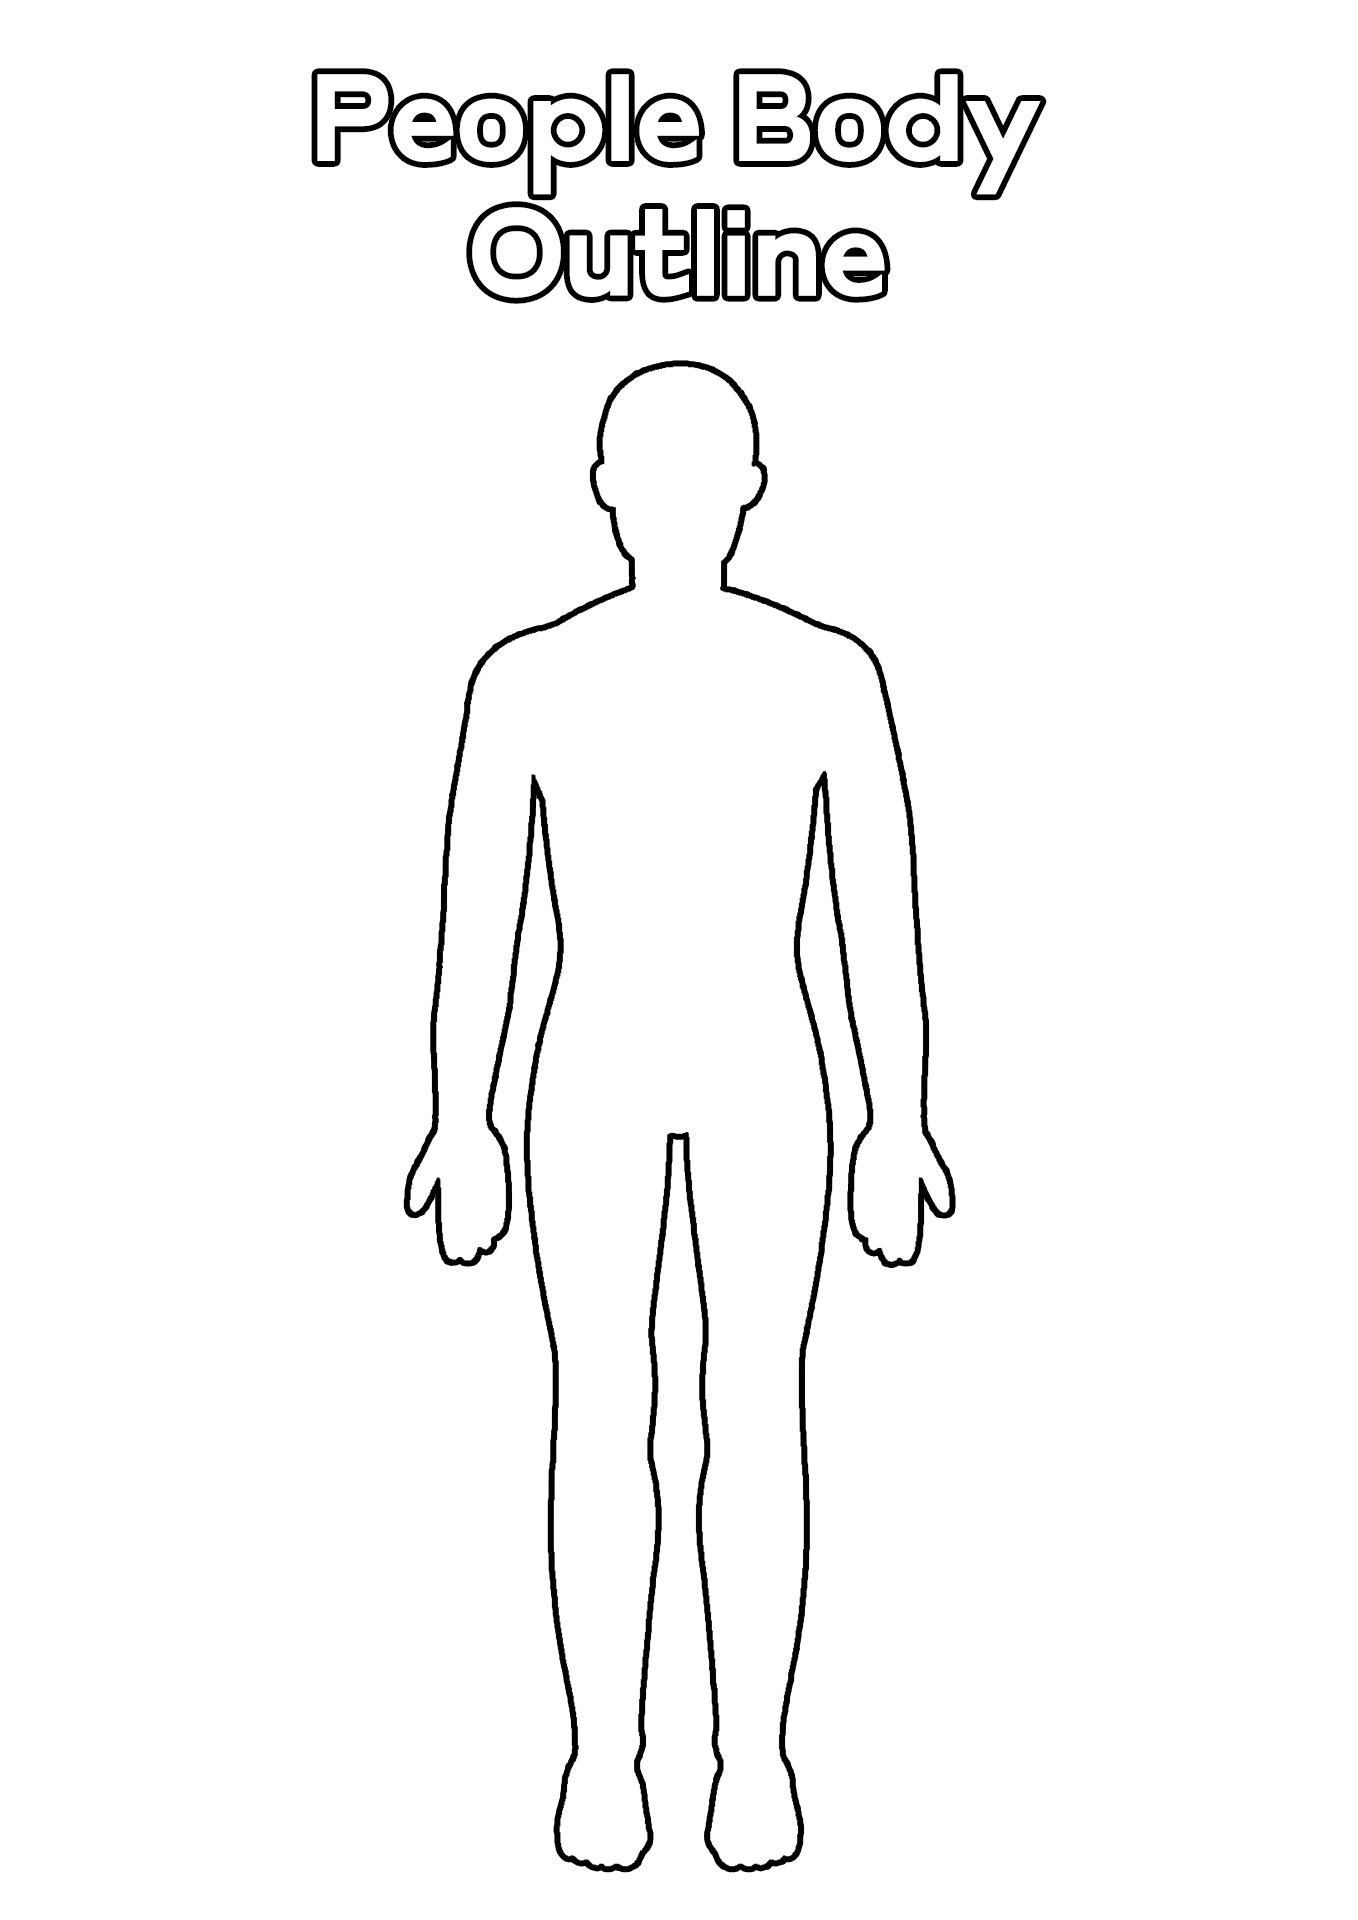 People Body Outline Image